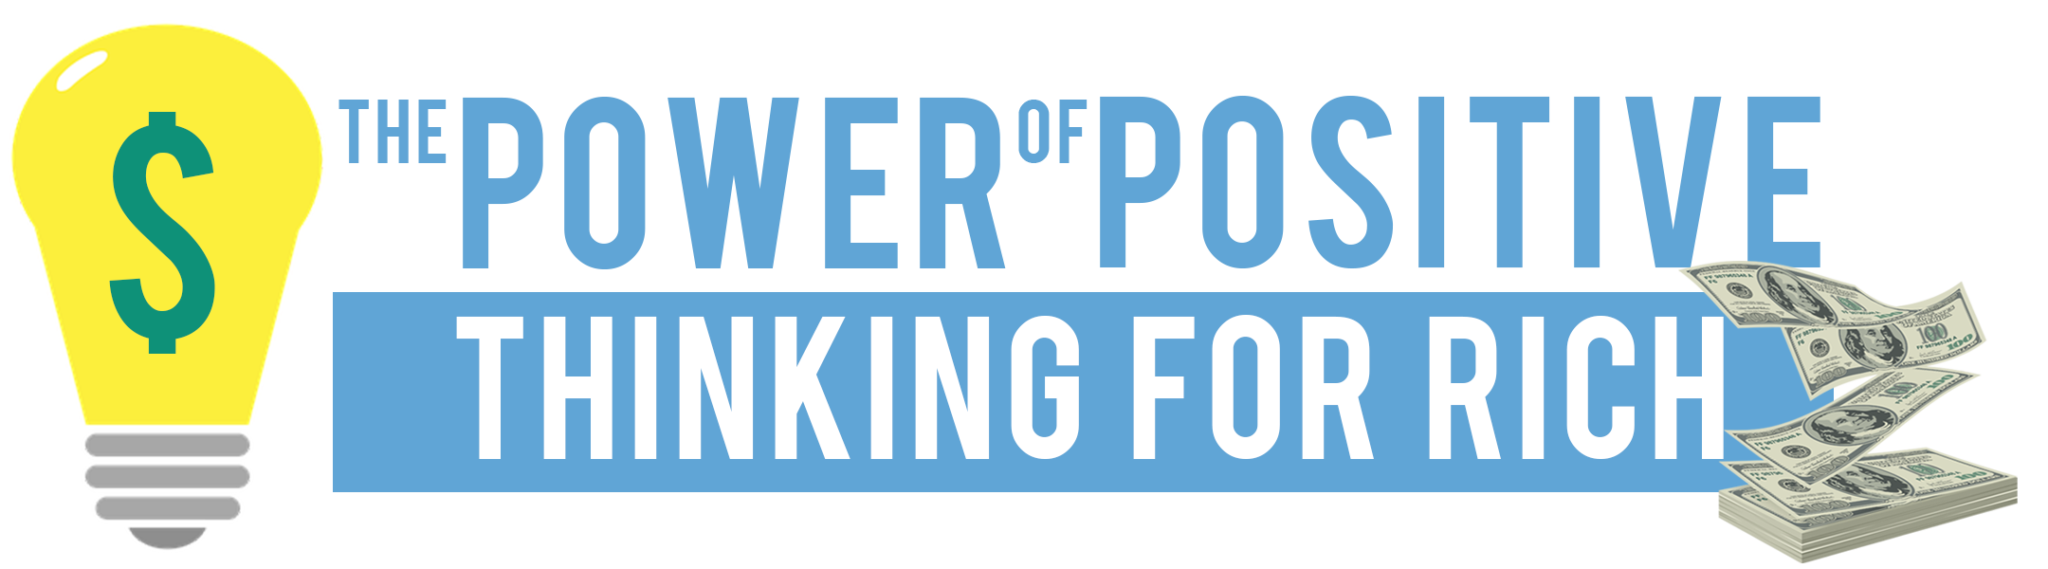 Logo The Power of Positive Thinking for Rich